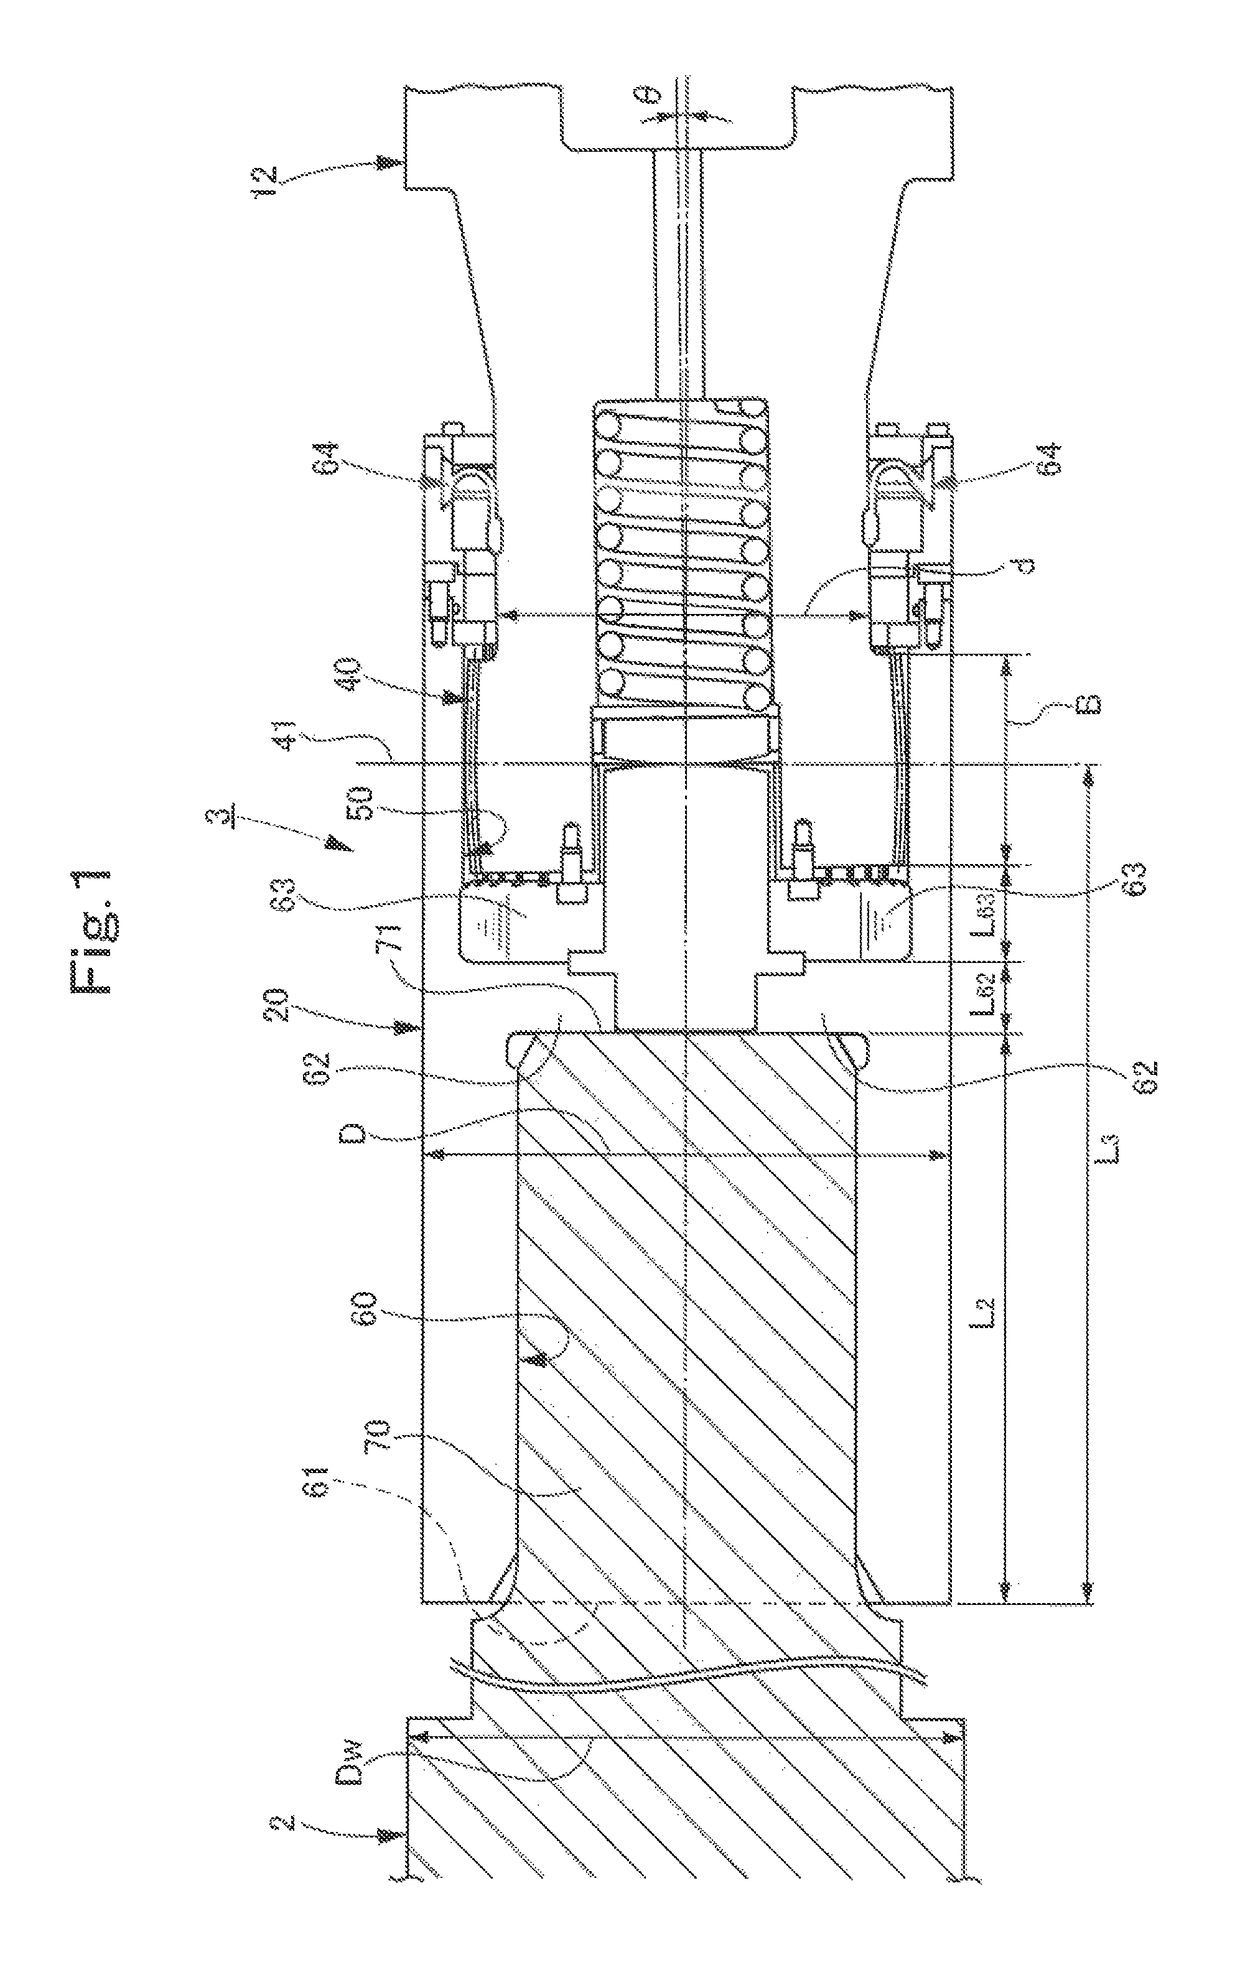 Gear spindle and rolling mill provided with same